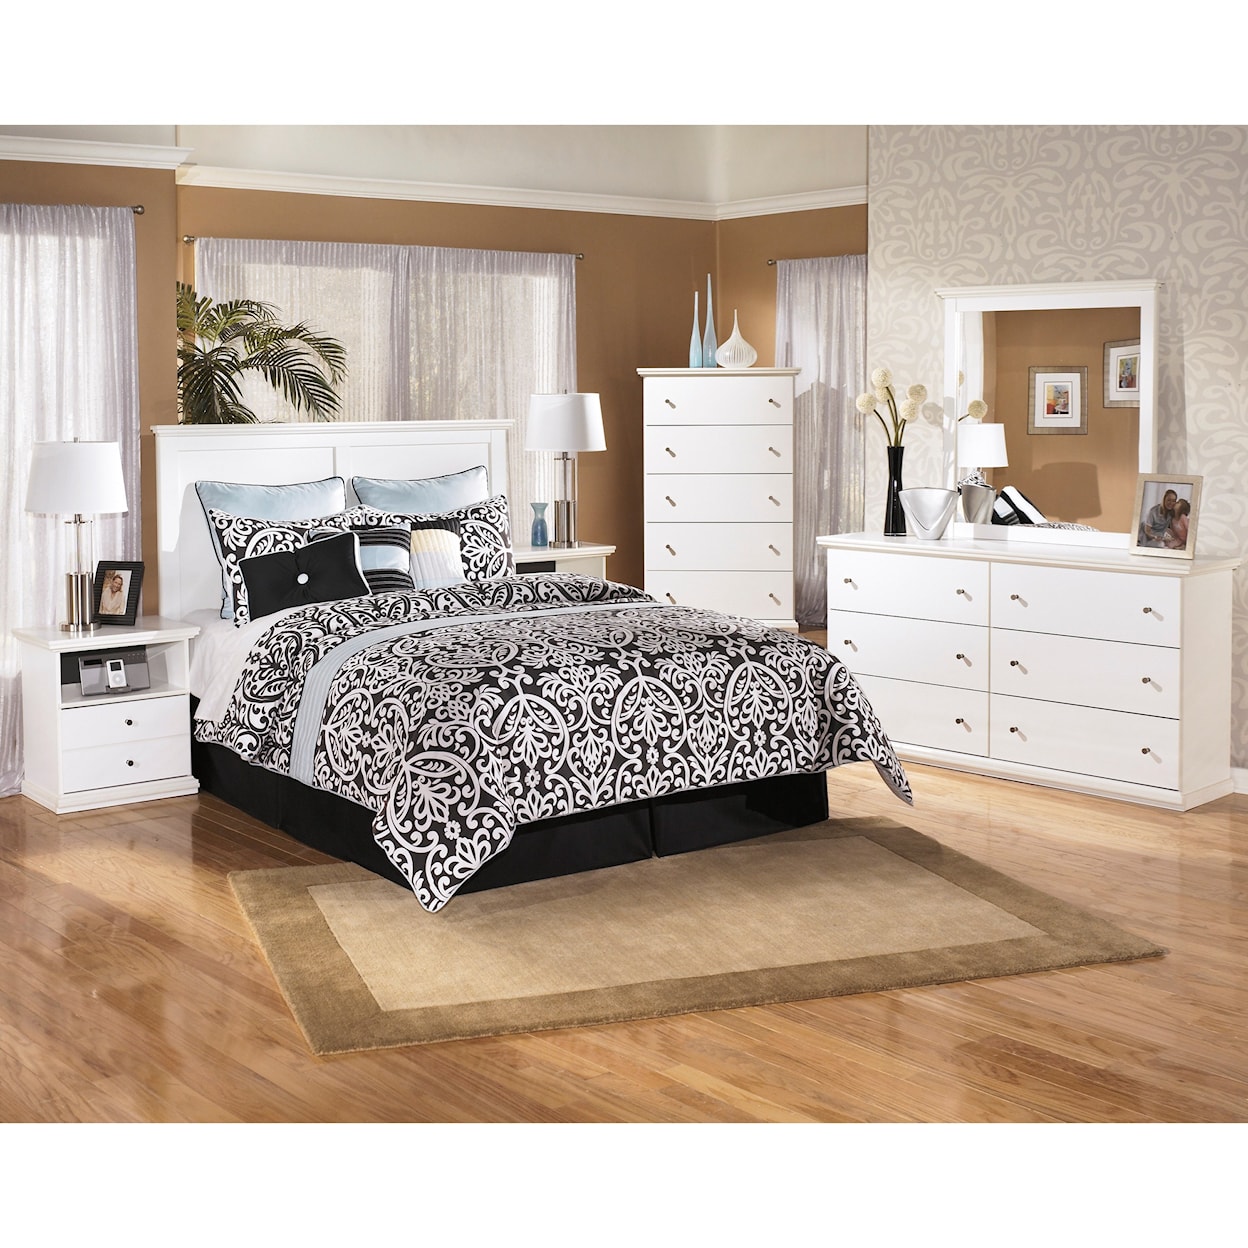 Signature Design by Ashley Bostwick Shoals Queen Bedroom Group